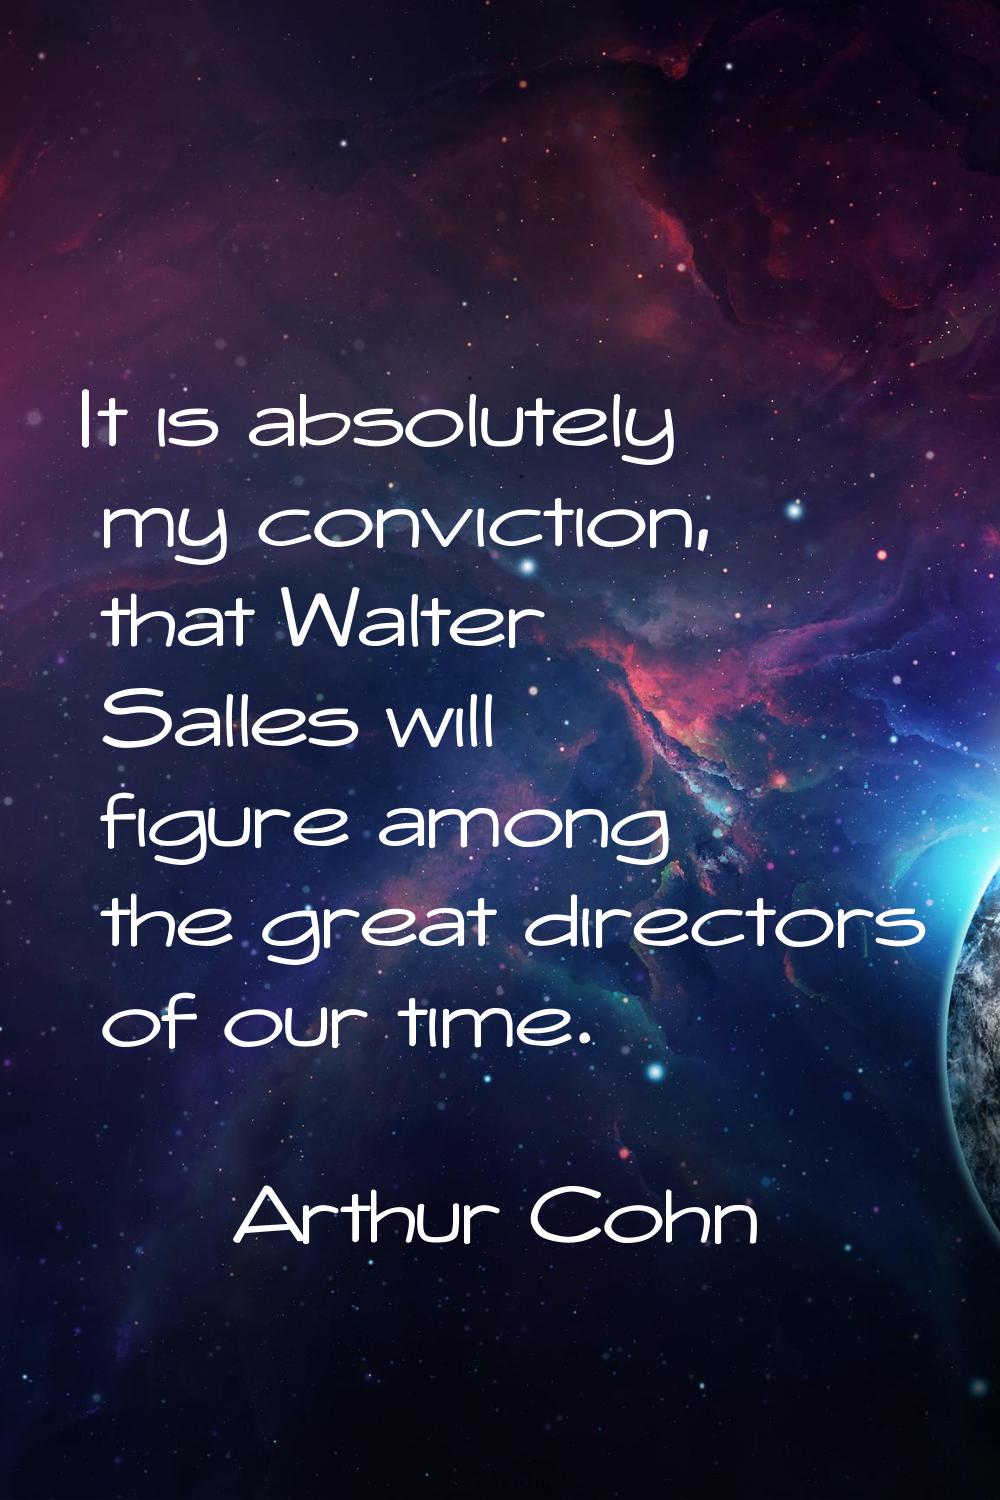 It is absolutely my conviction, that Walter Salles will figure among the great directors of our tim